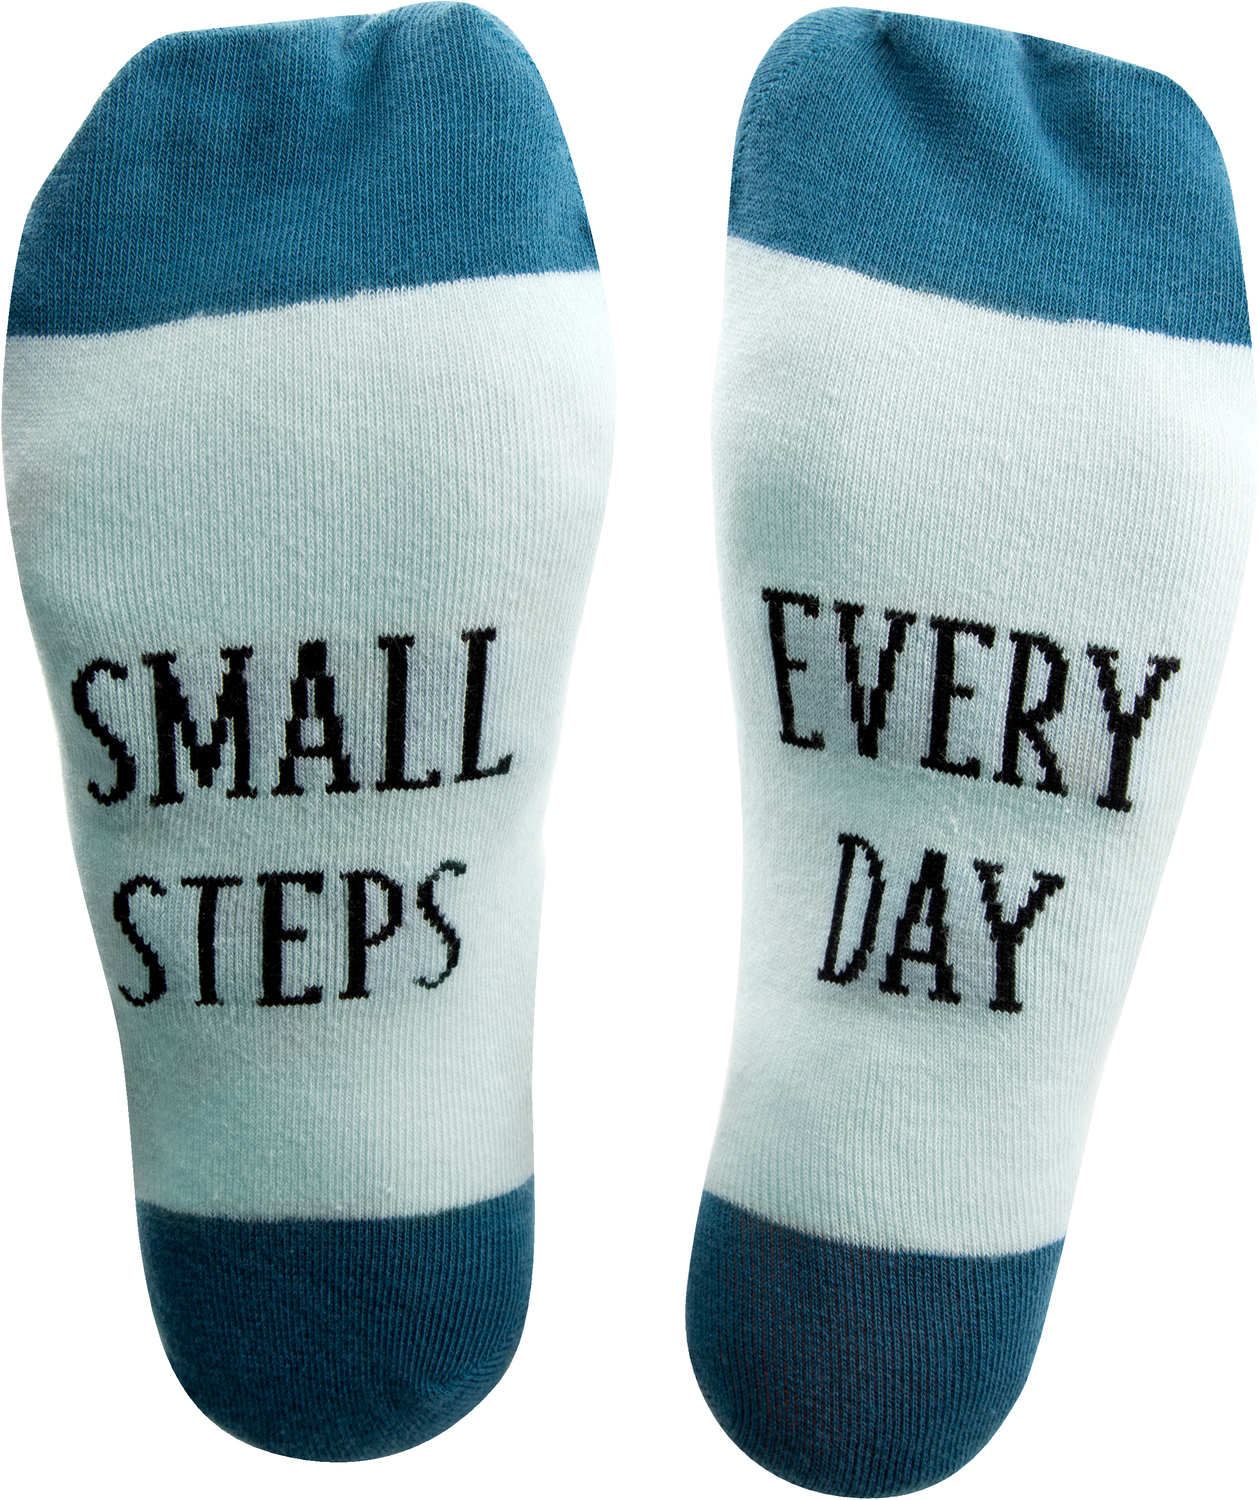 Small Steps by Faith Hope and Healing - Small Steps - S/M Unisex Sock